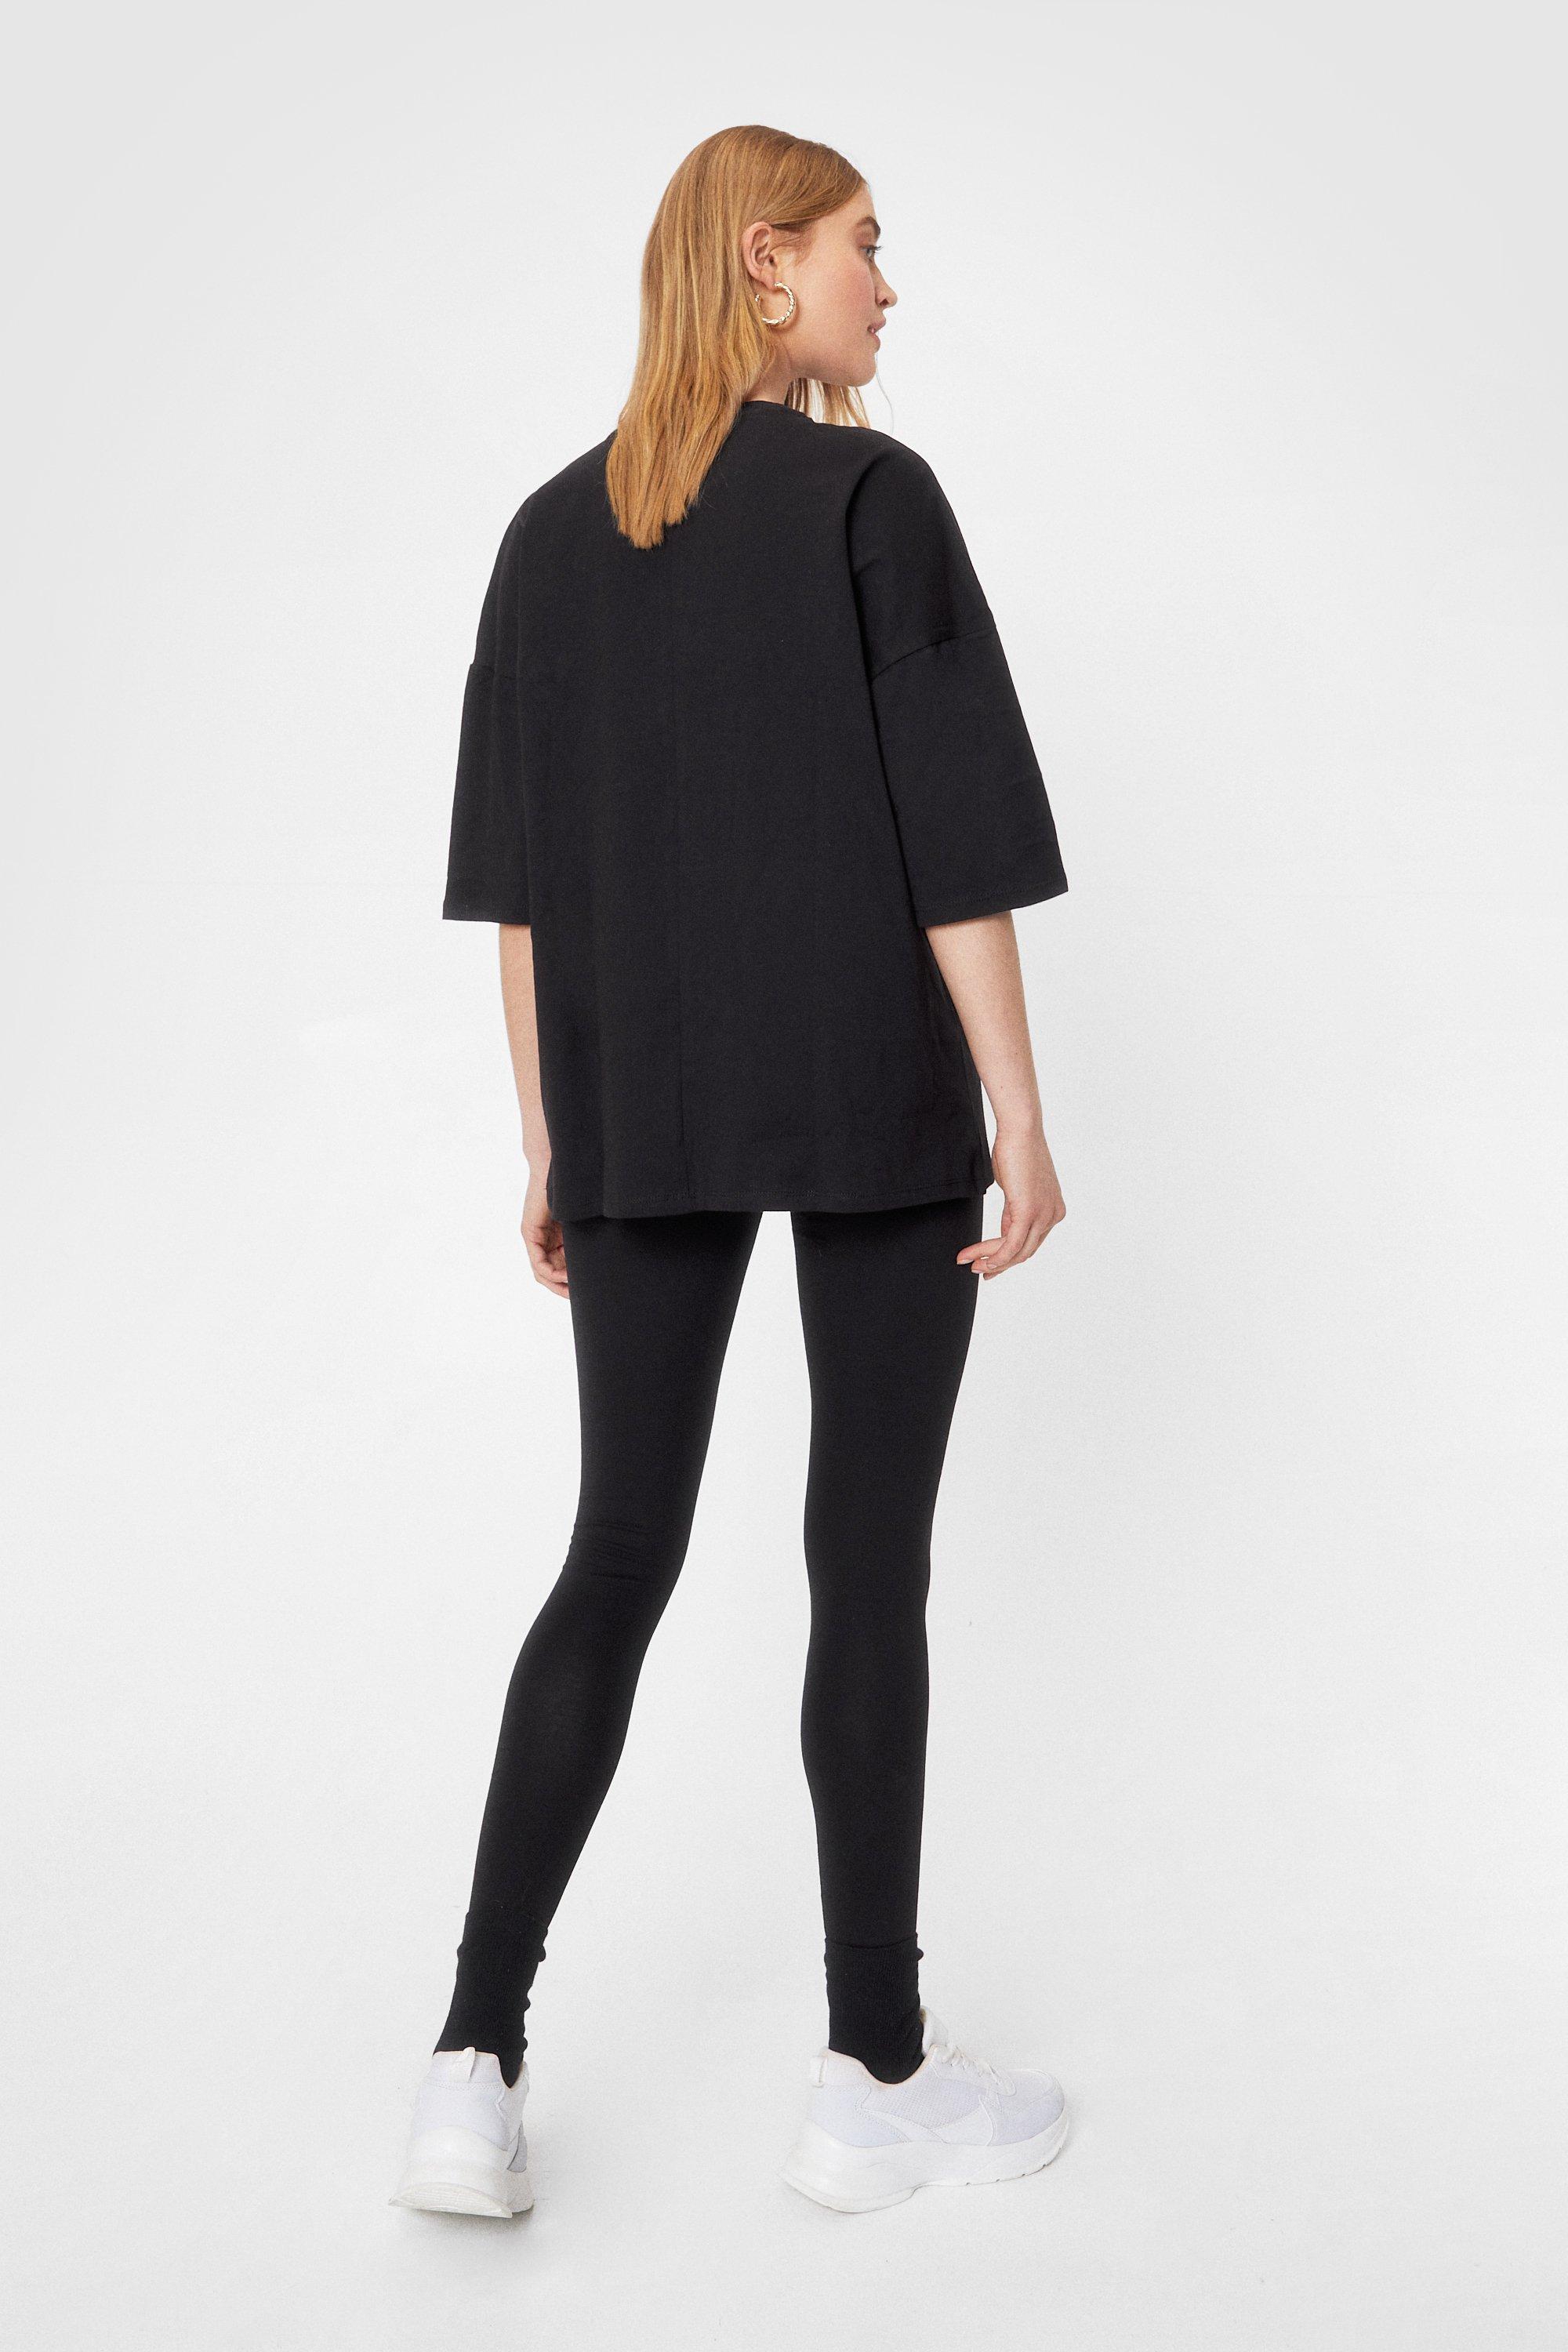 Comfy oversized T-shirt and leggings